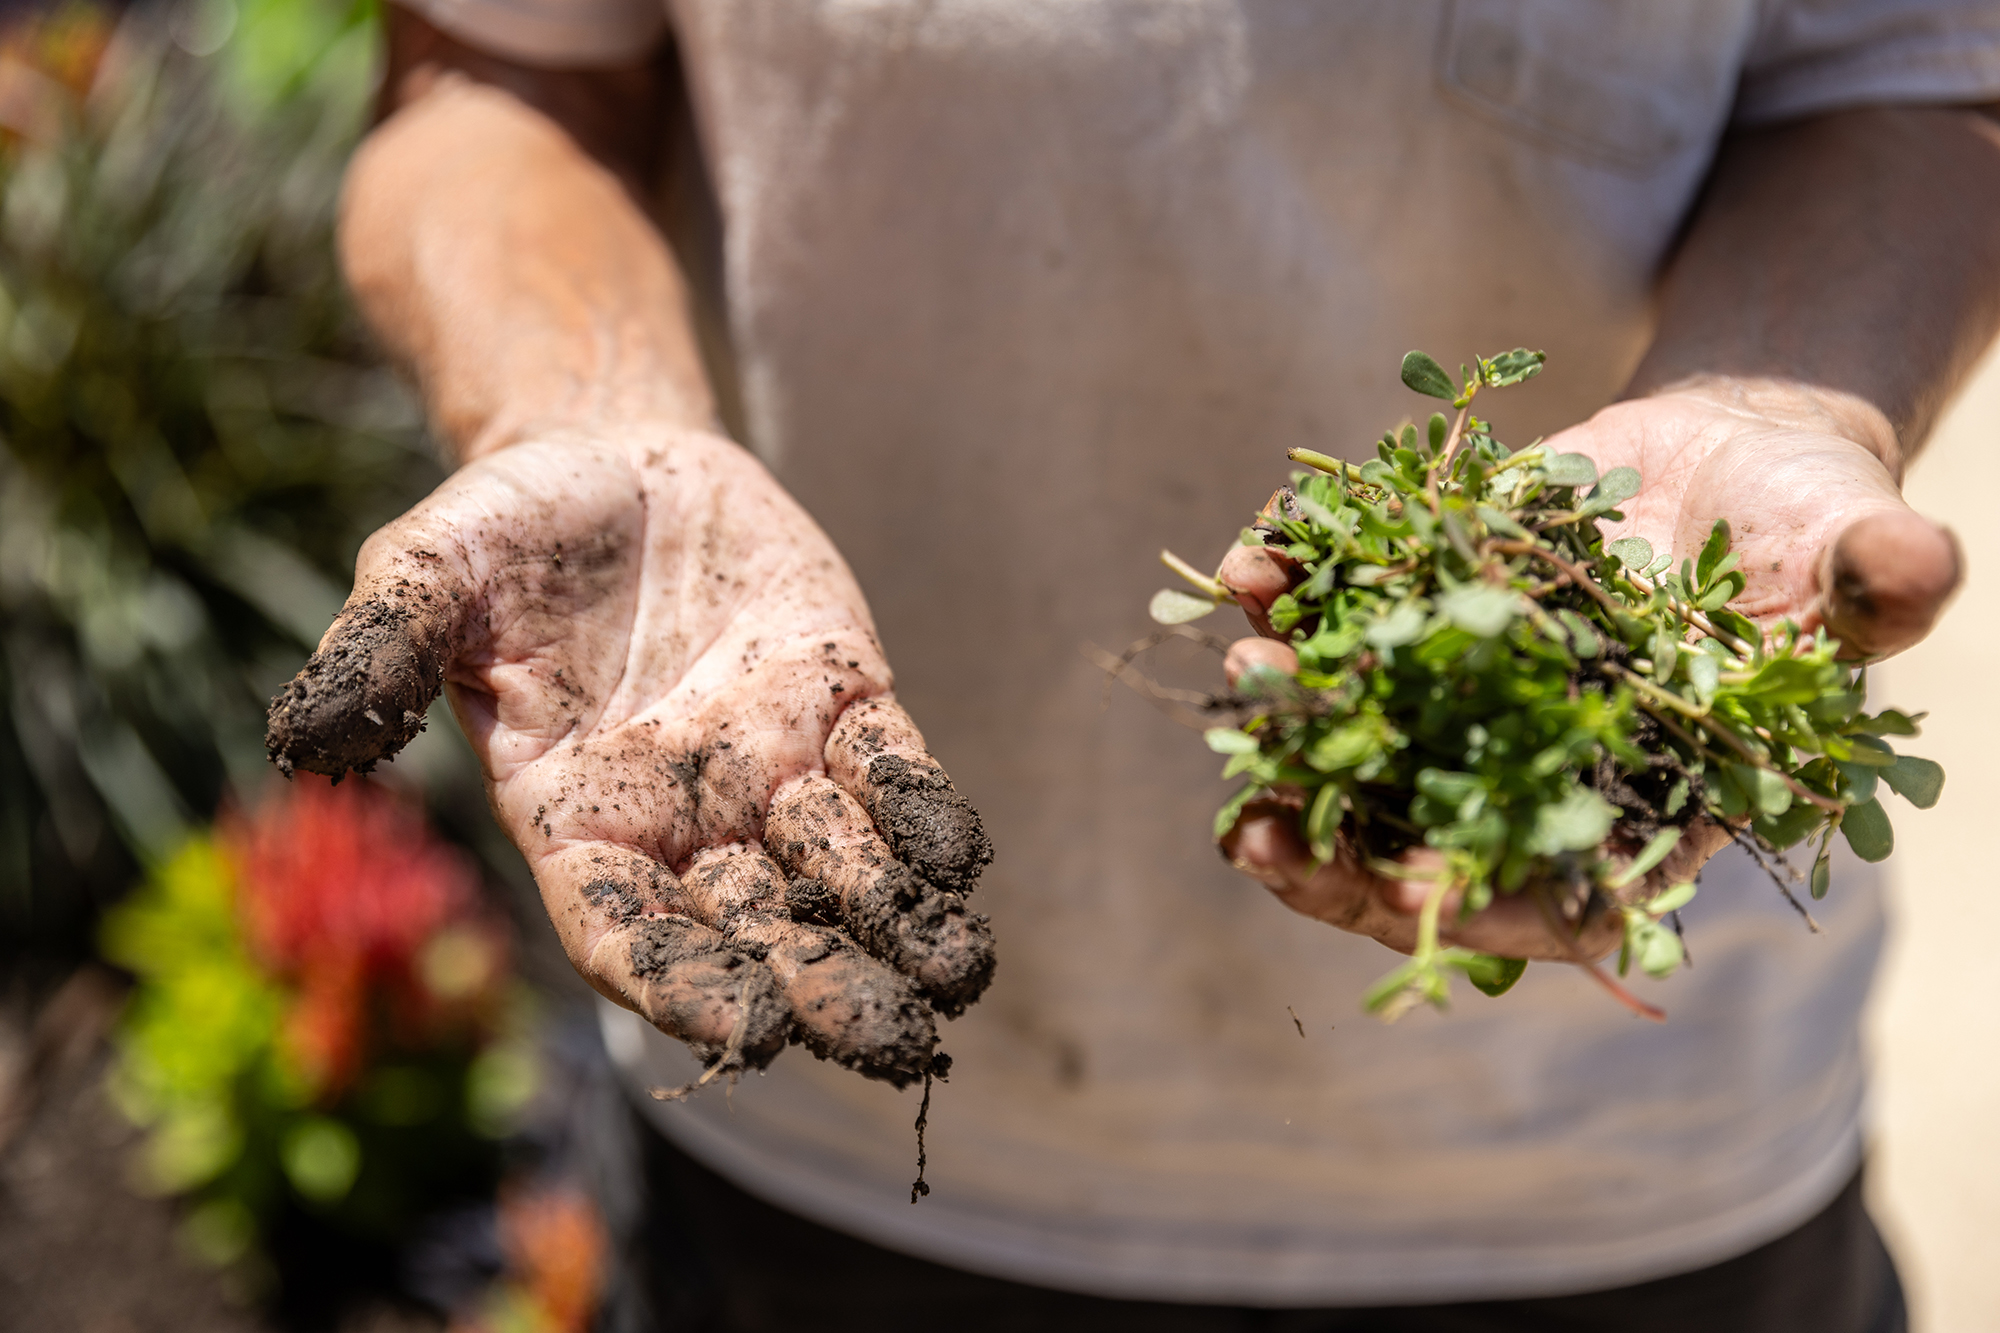 colleen thomas' hands covered in dirt, holding some greens